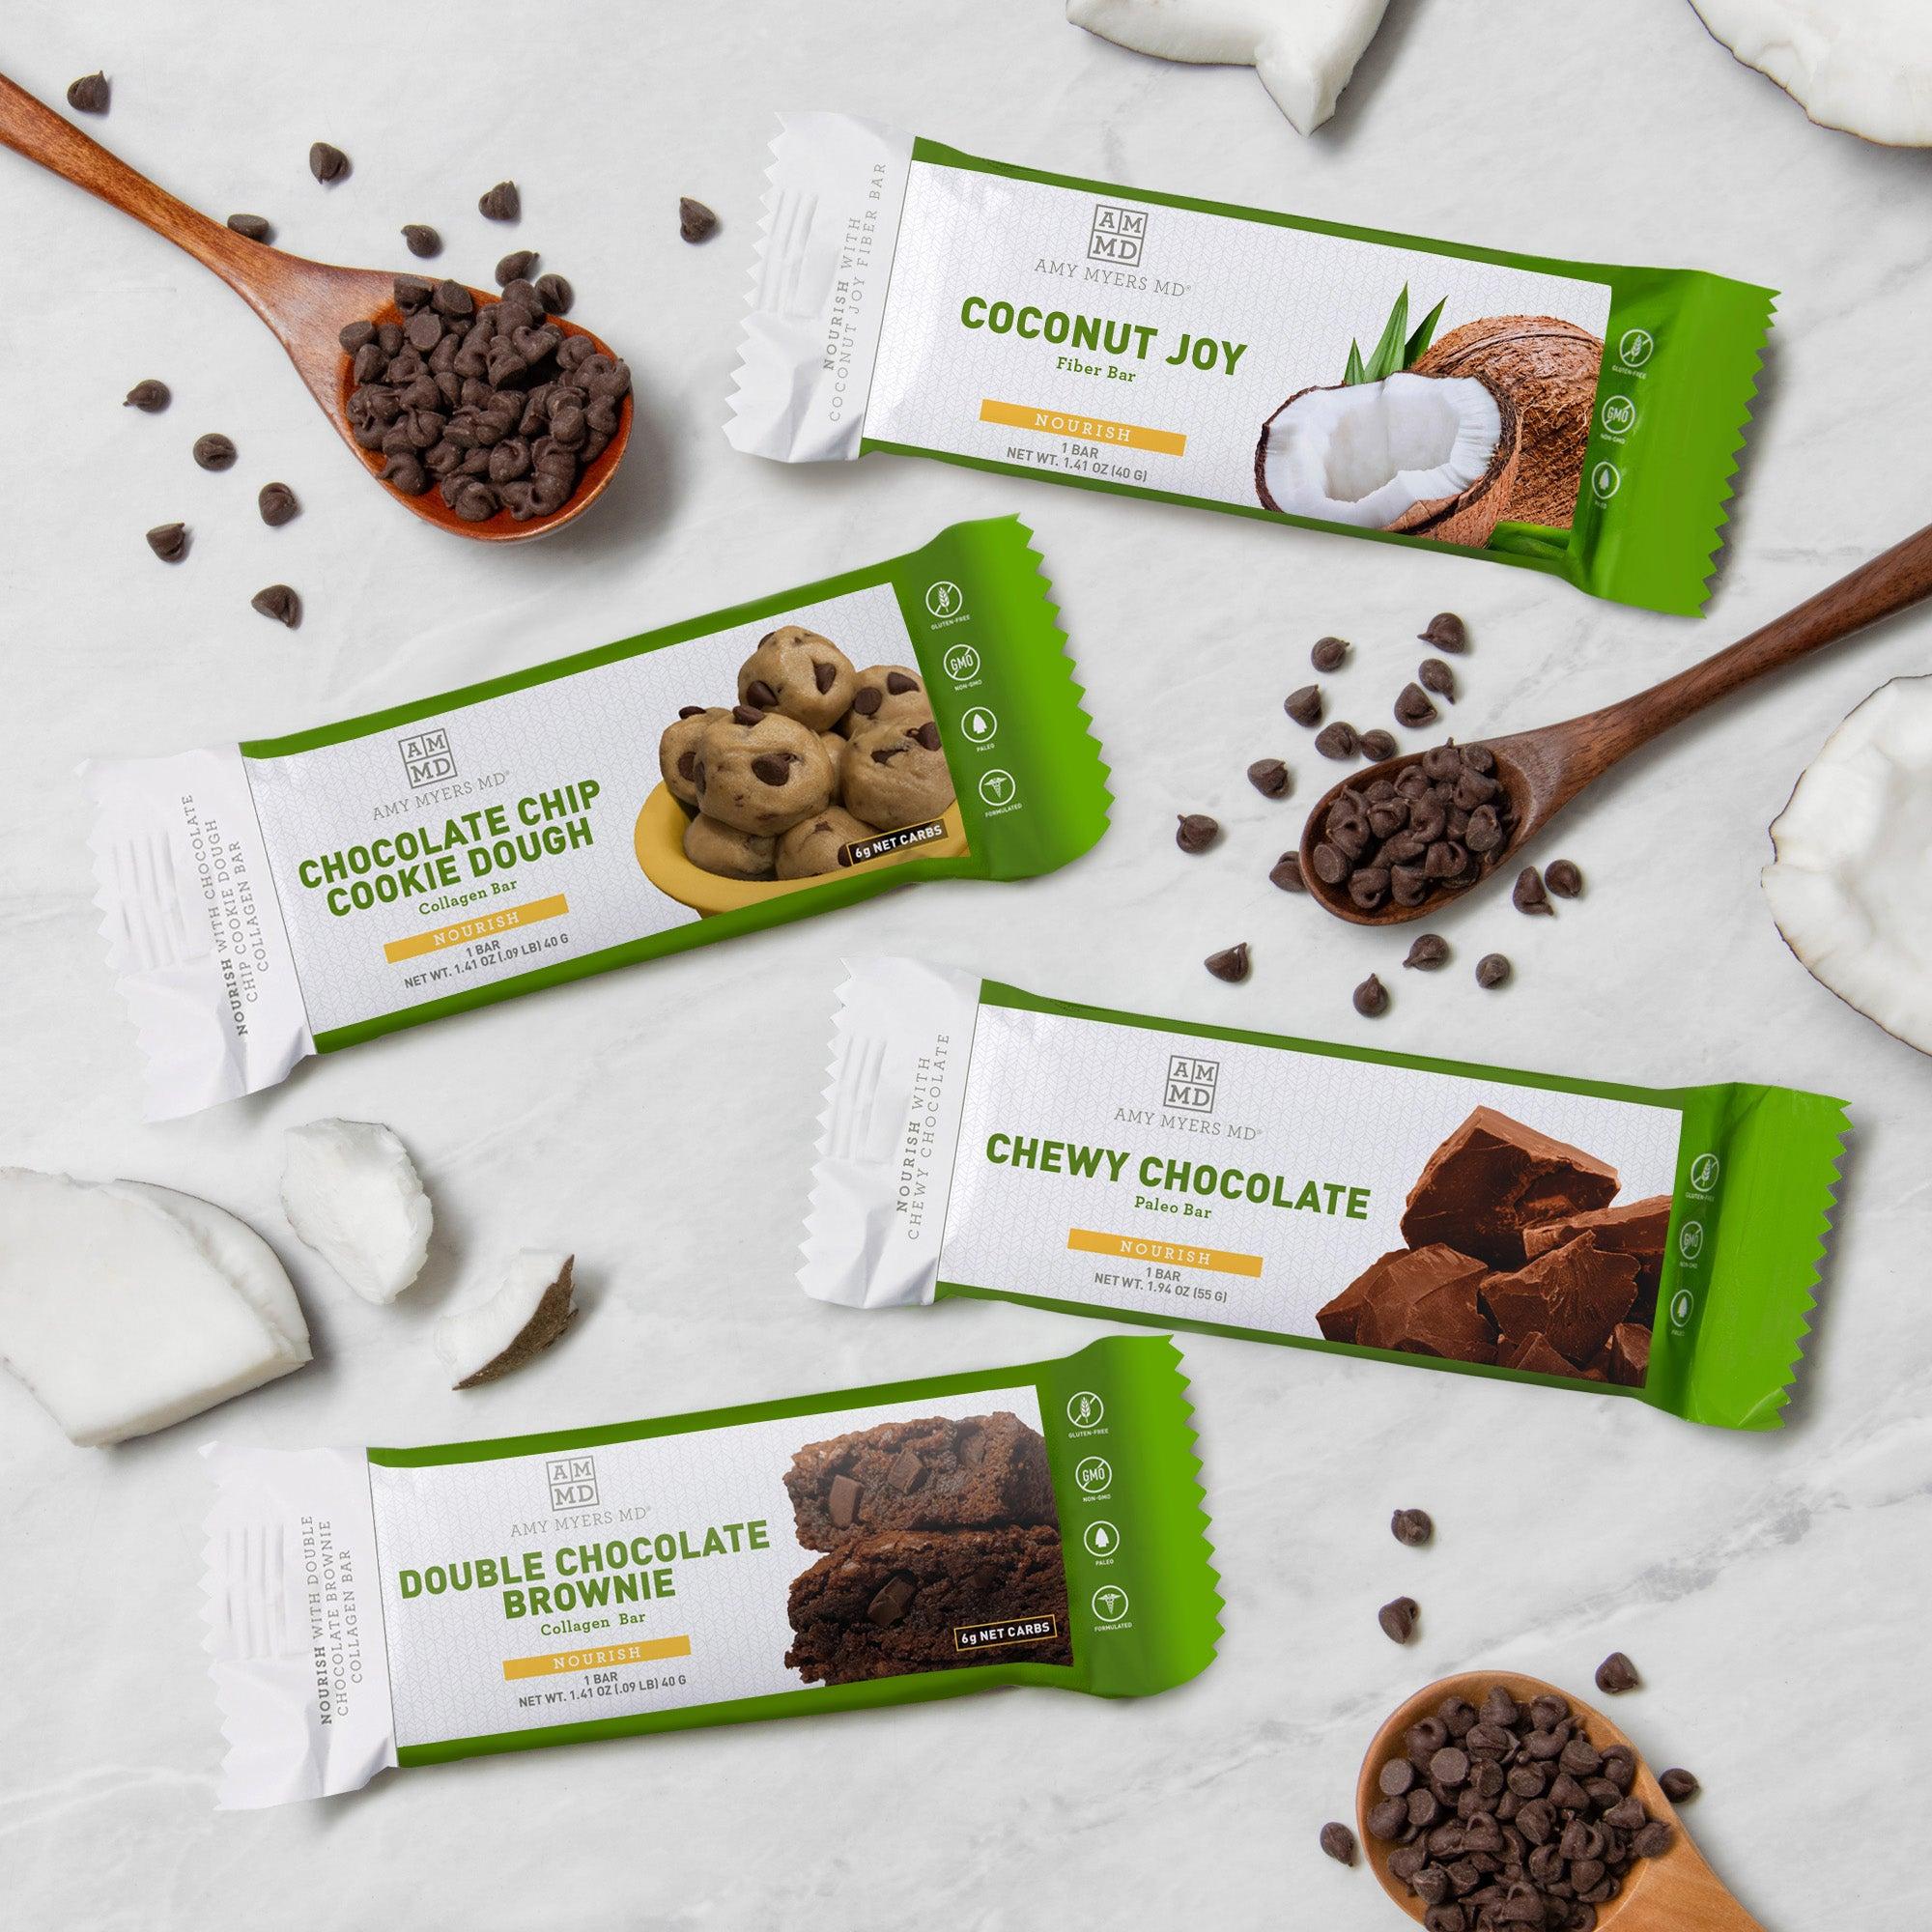 The 4 Bar Sampler Pack includes all 4 bars, each sitting on a white kitchen counter. Top to bottom: Coconut Joy Fiber Bar, Cookie Dough Collagen Protein Bar, Chewy Chocolate Paleo Bar, and Double Chocolate Brownie Collagen Protein Bar.